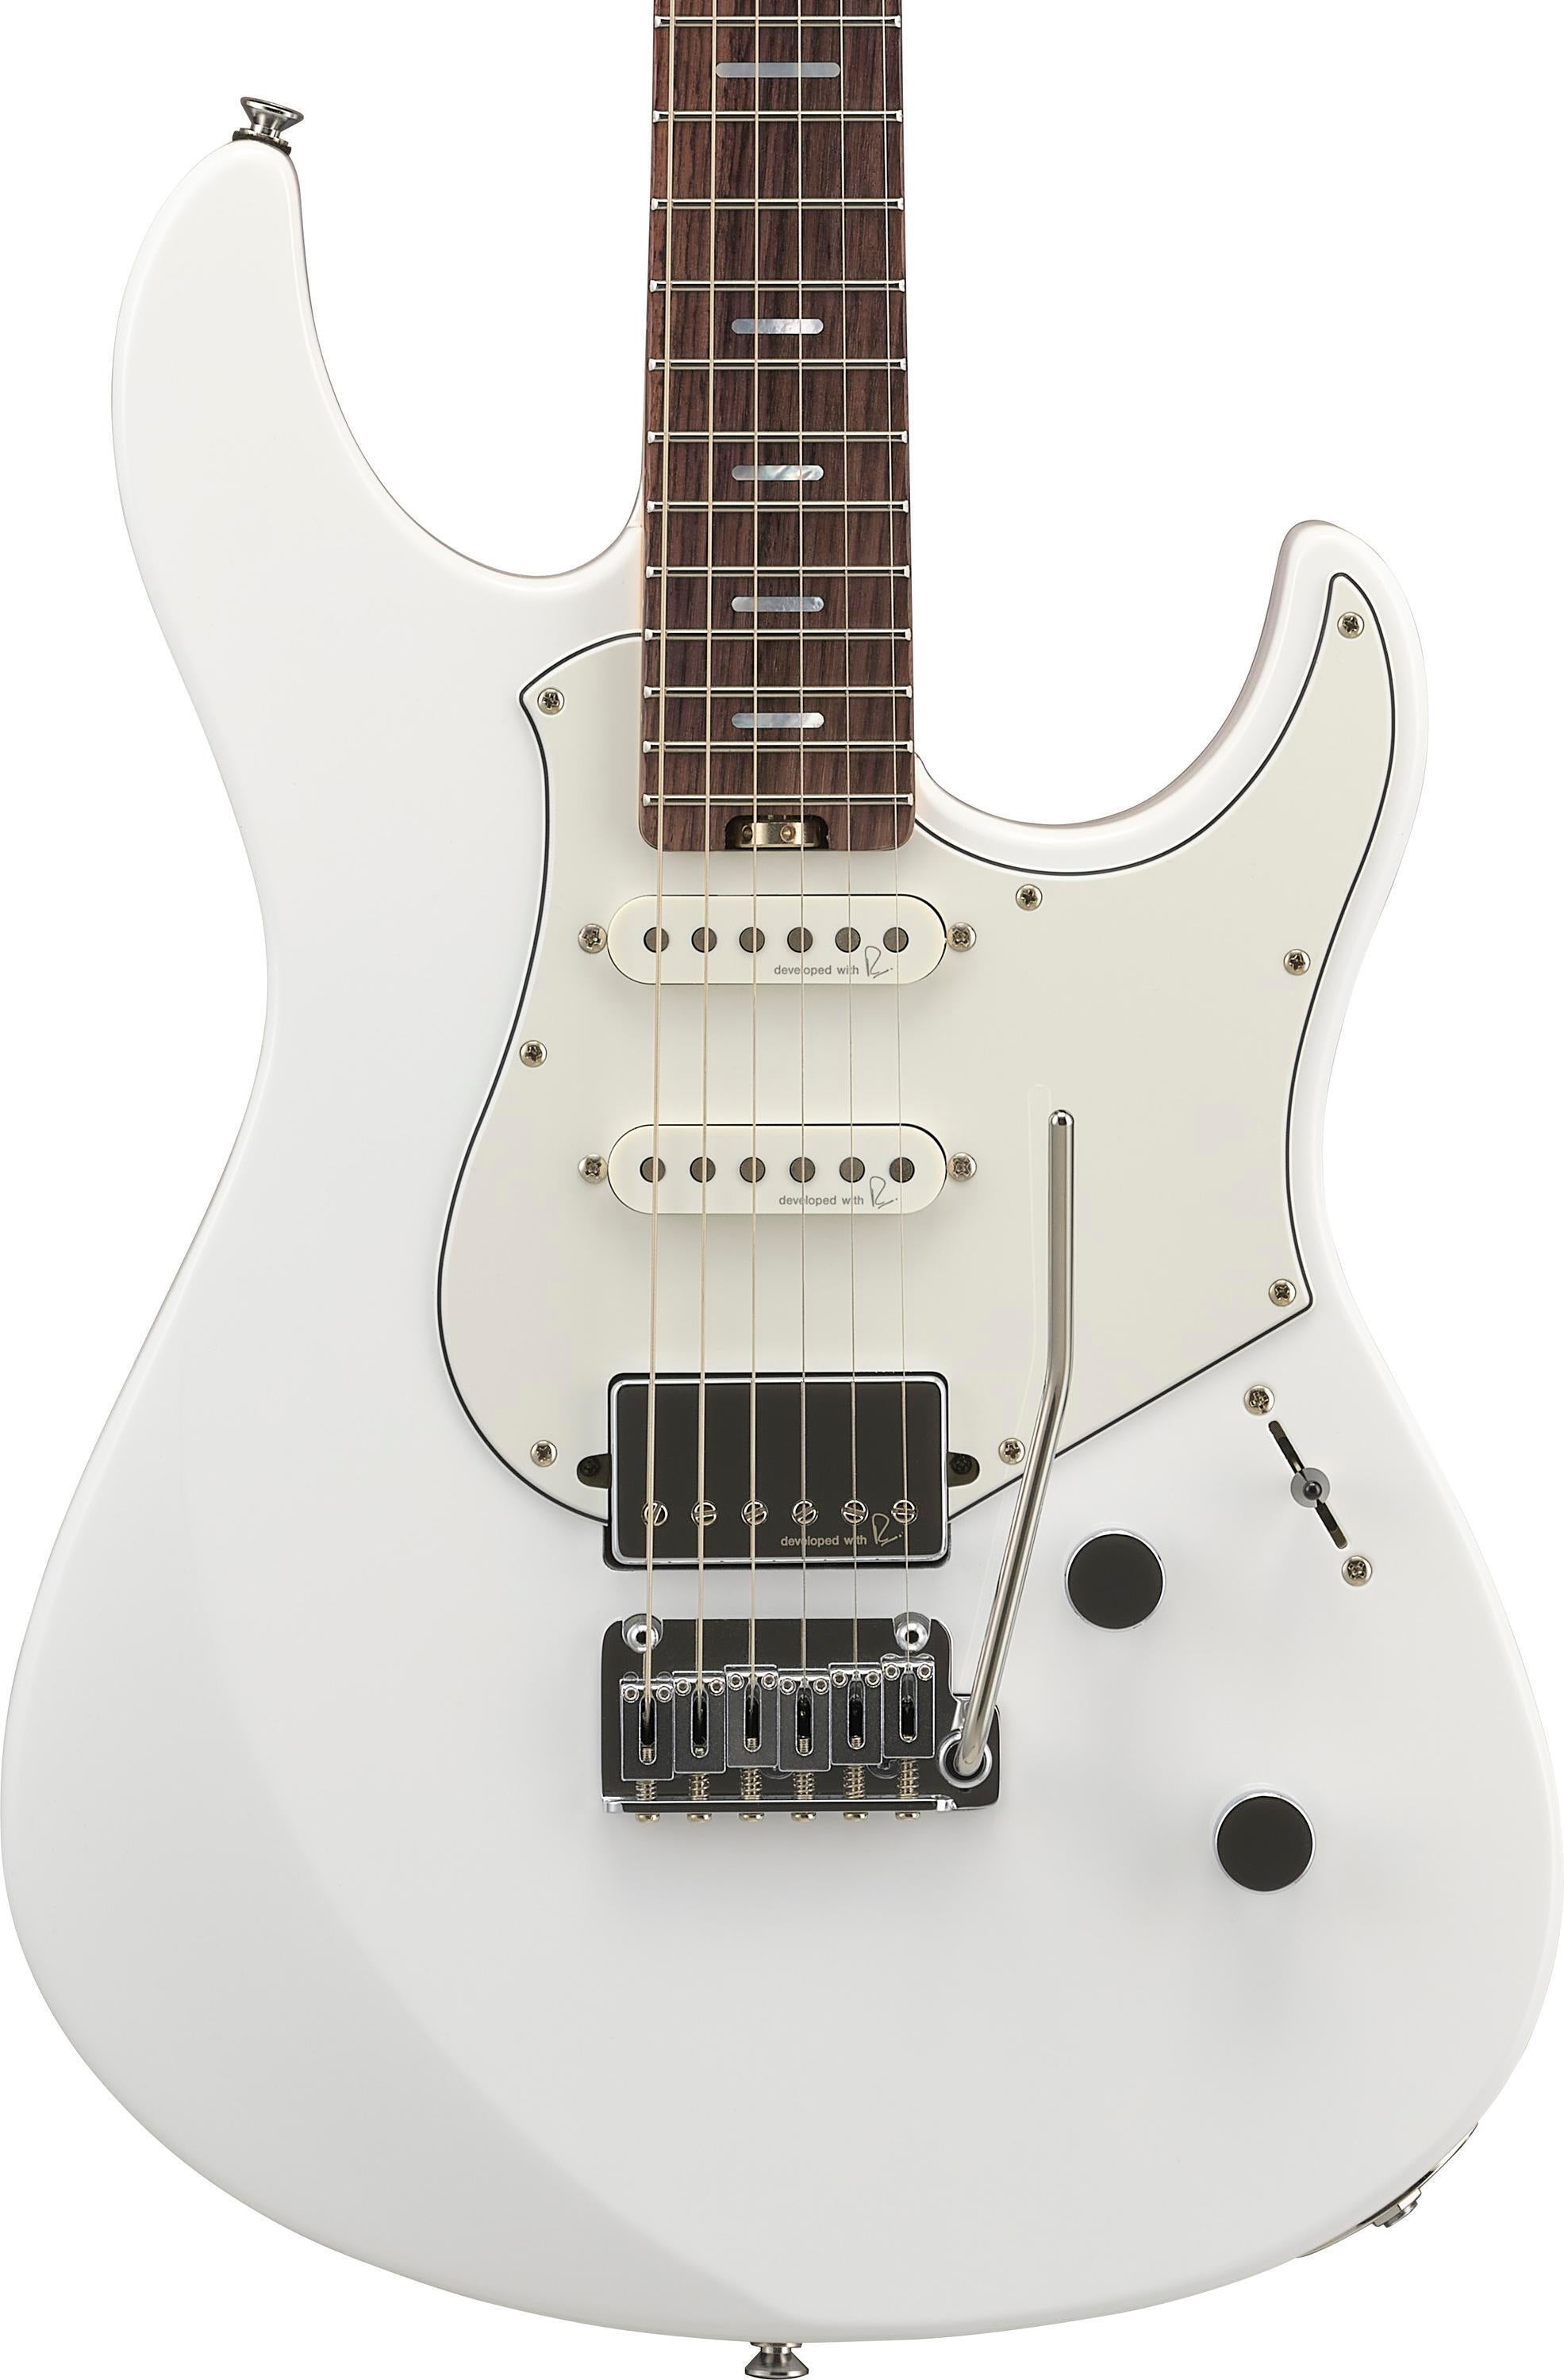 Yamaha PACS+12 Pacifica Standard Plus Electric Guitar, Rosewood Fingerboard - Shell White | Zoso Music Sdn Bhd